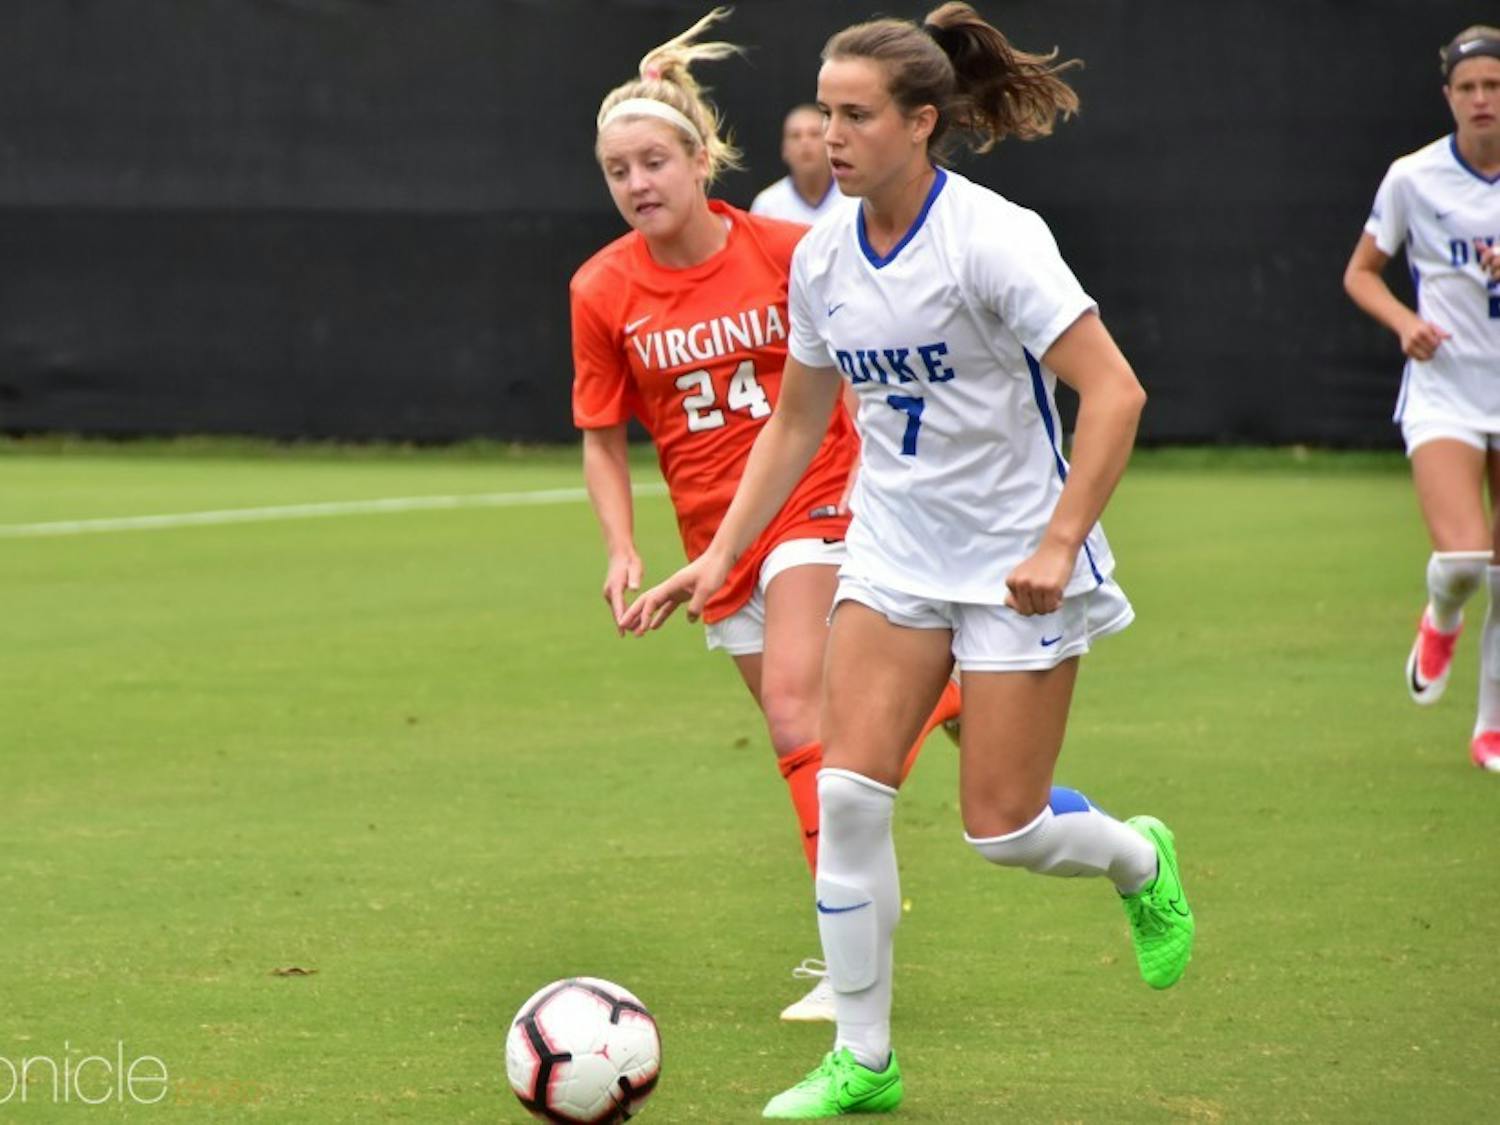 Sophie Jones will be relied upon to help replace Duke's graduated midfielders, including Taylor Racioppi.